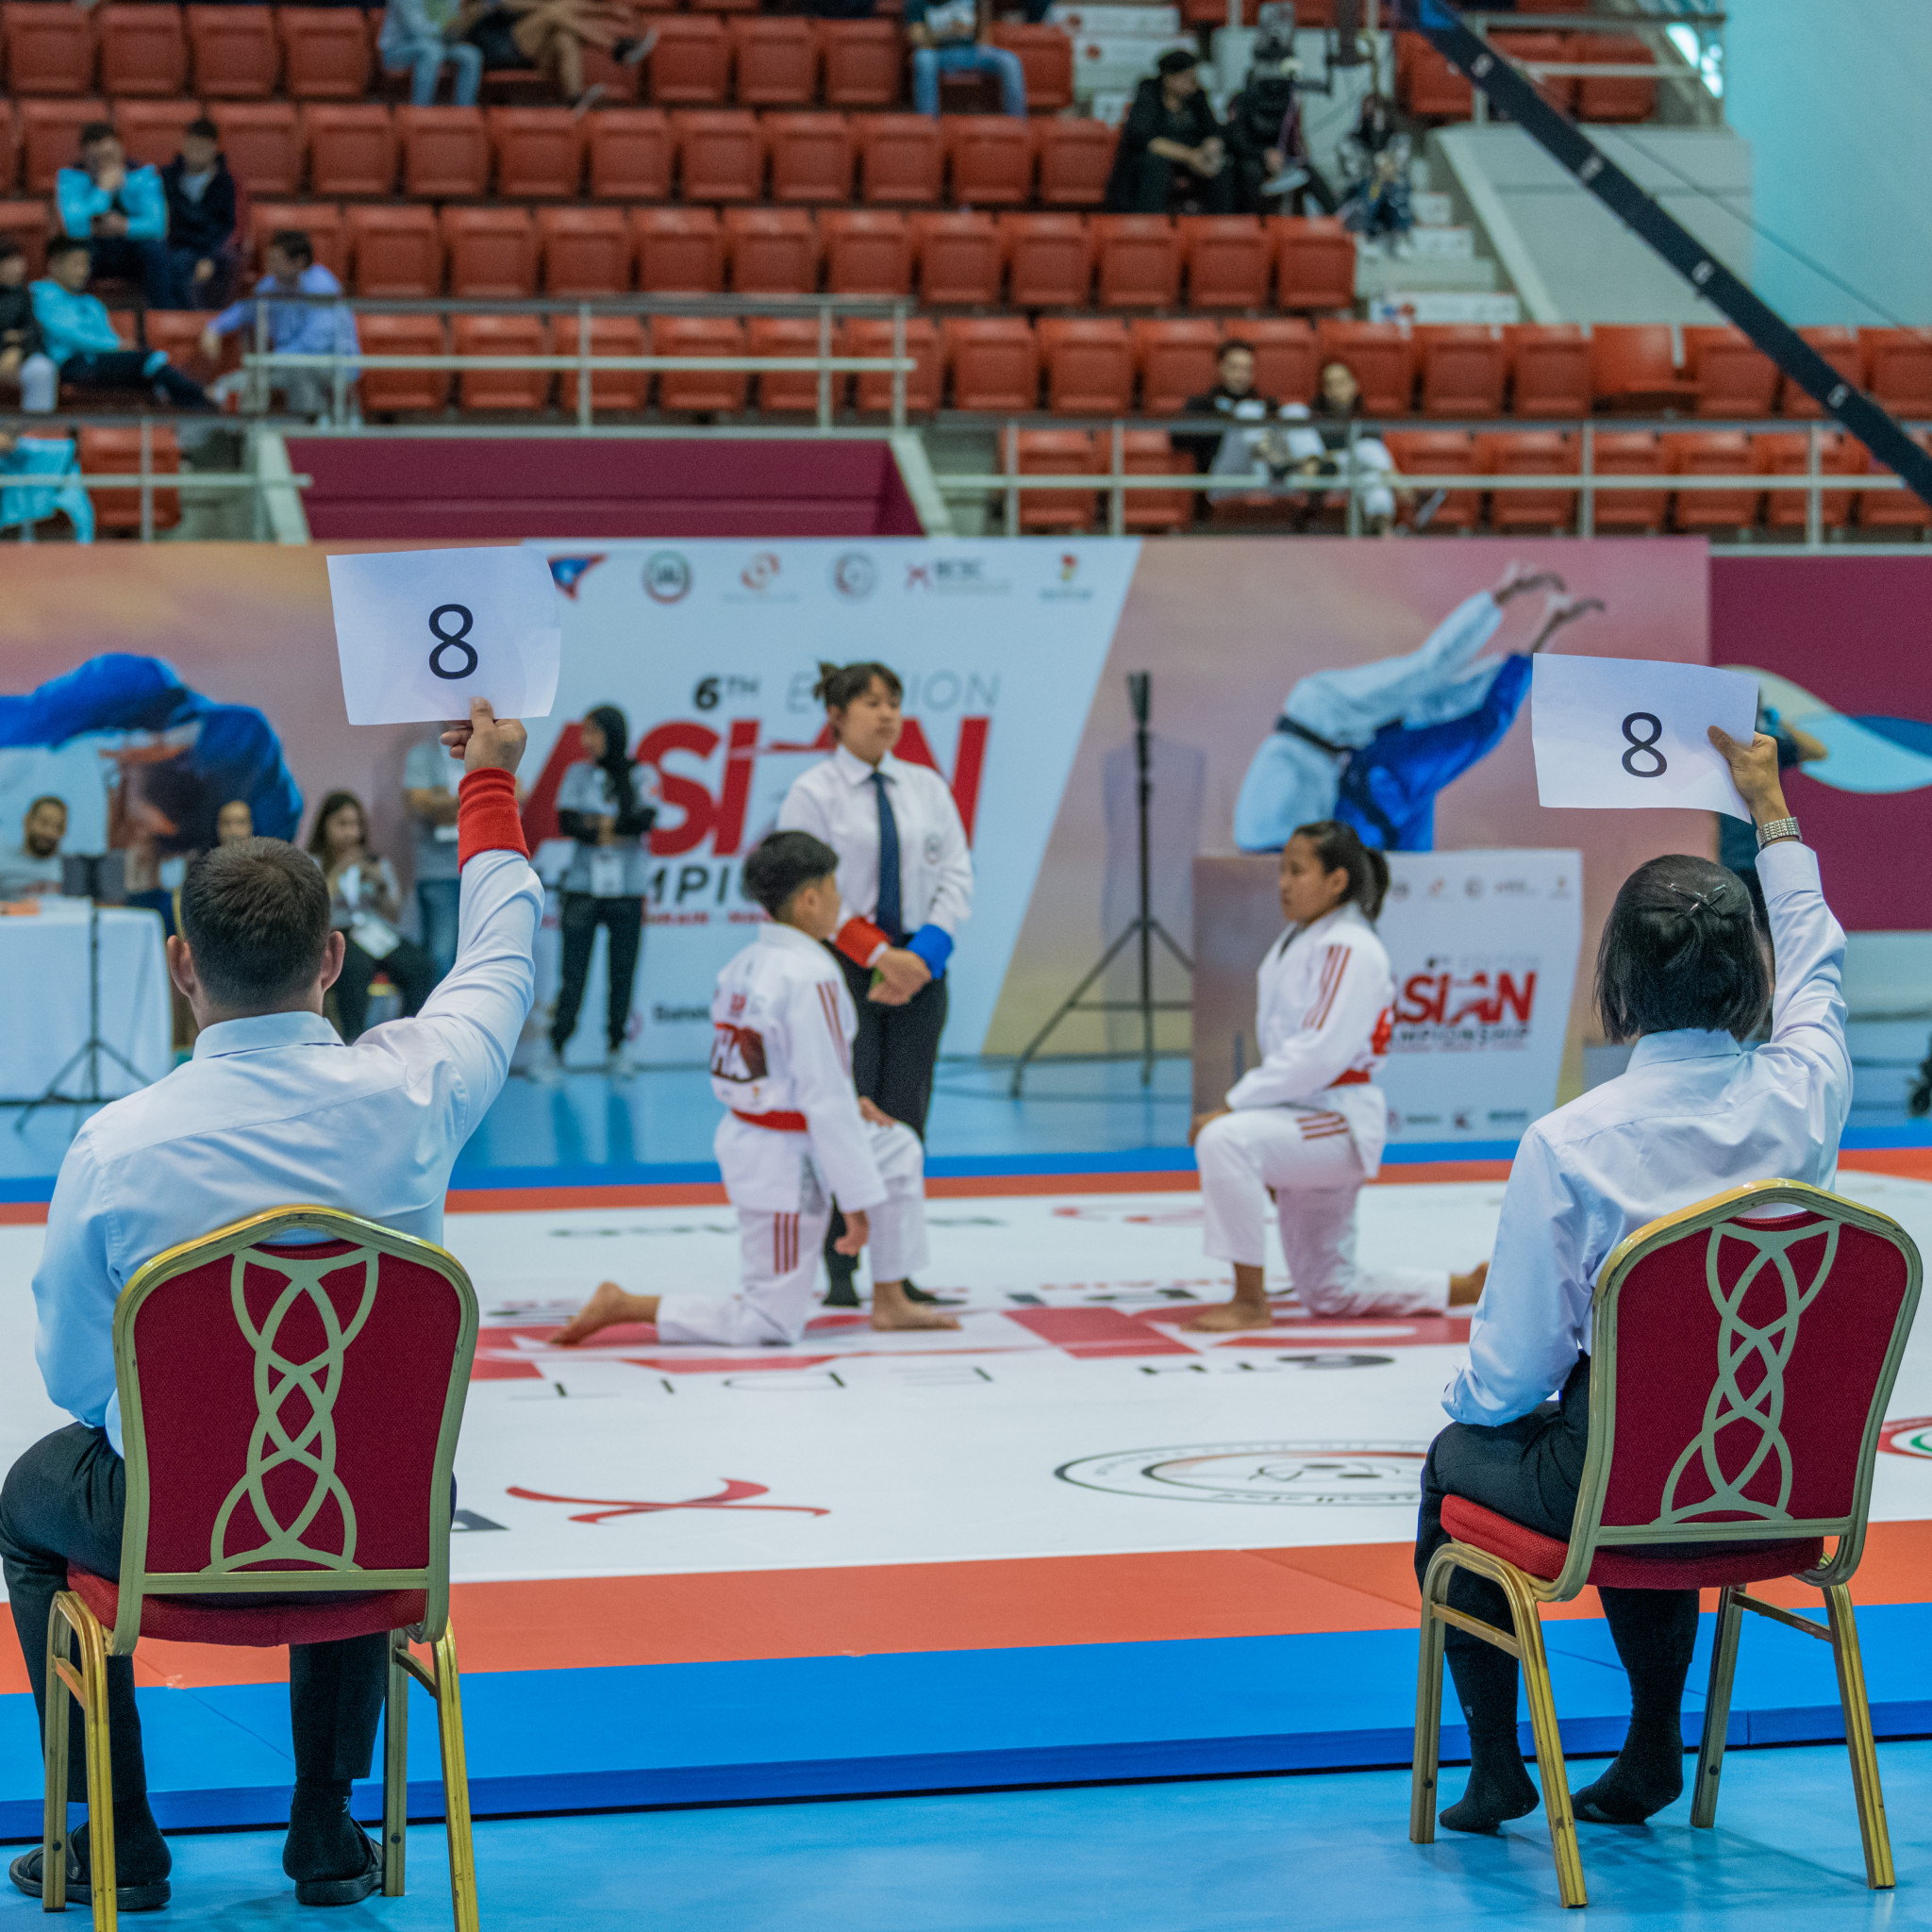 Thailand took top marks in the duo events ©JJAU